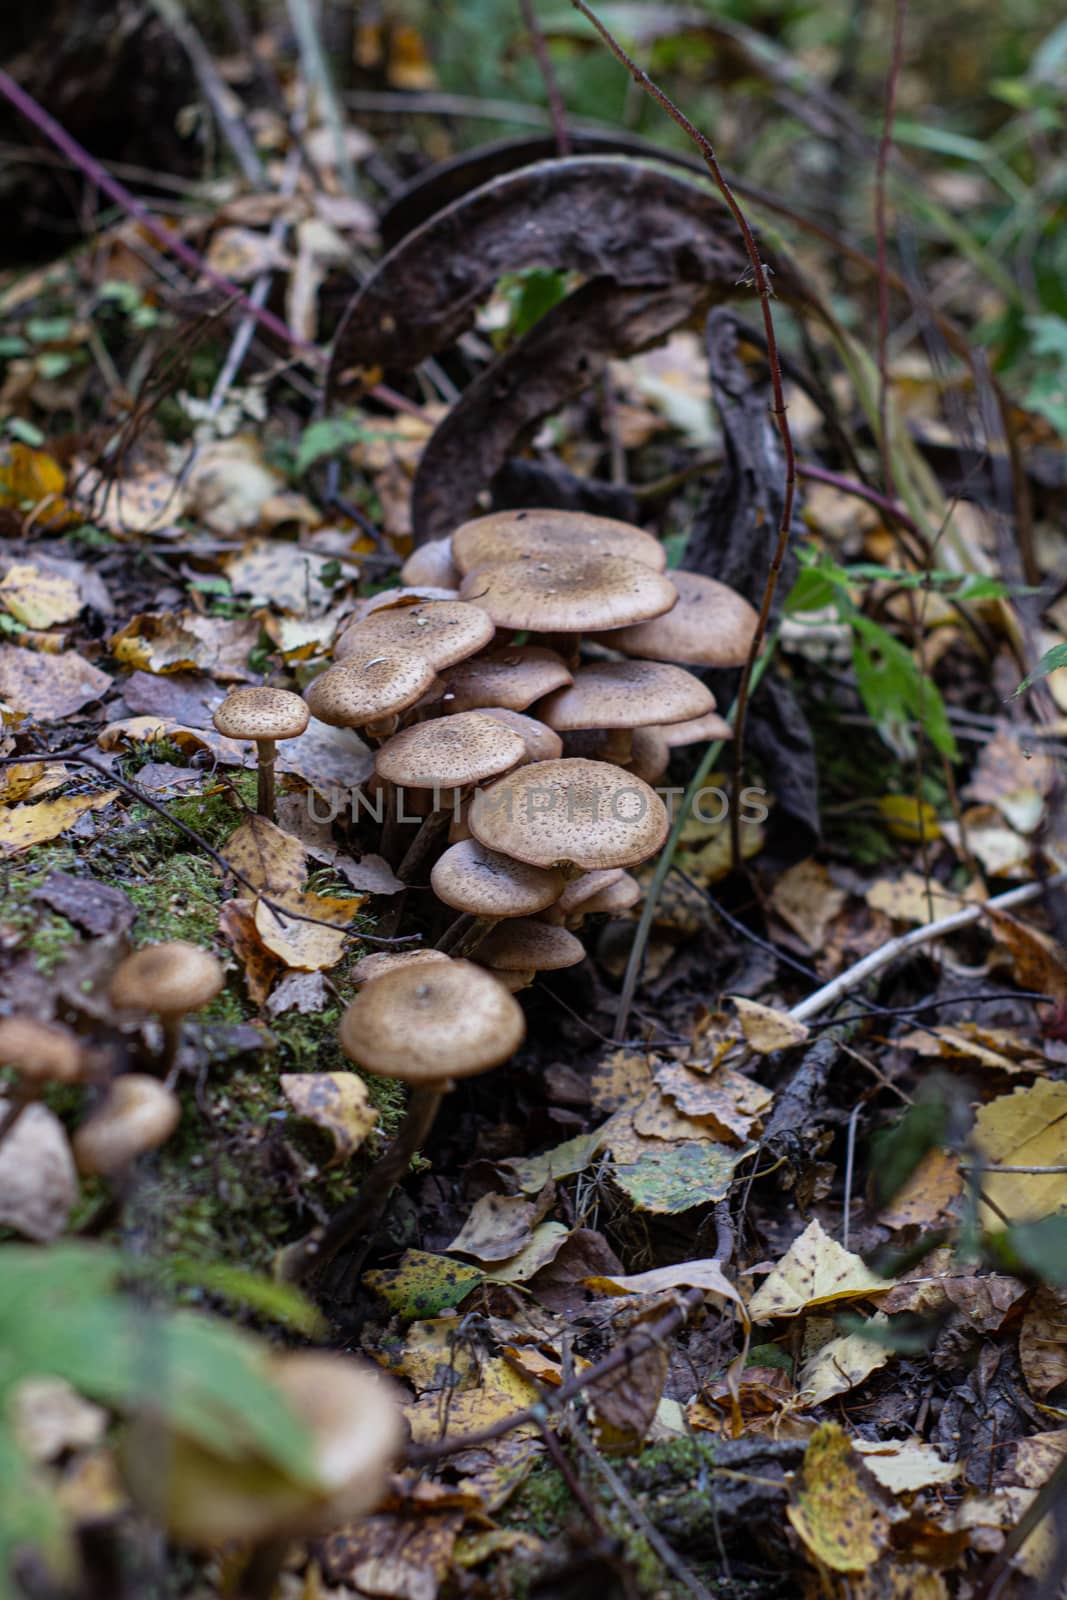 Autumn mushrooms in the forest. Mushroom picking. A walk in the woods. Honey agaric